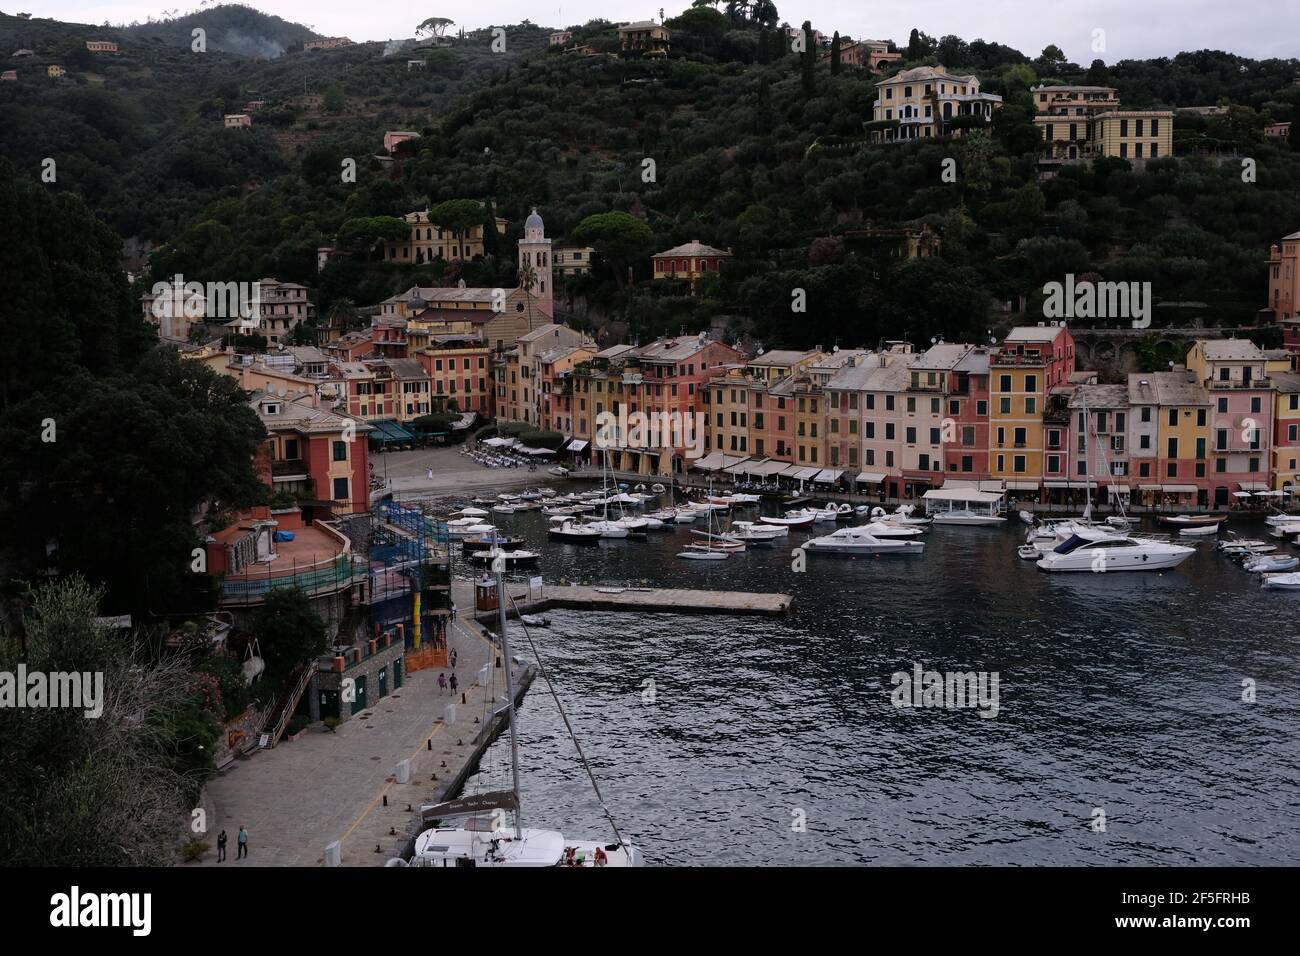 Yachts and Recreationa Boats - Colorful Traditional Houses - Portofino, Italy - Luxury High-End Little Town with a Small Harbour in Italian Riviera Stock Photo